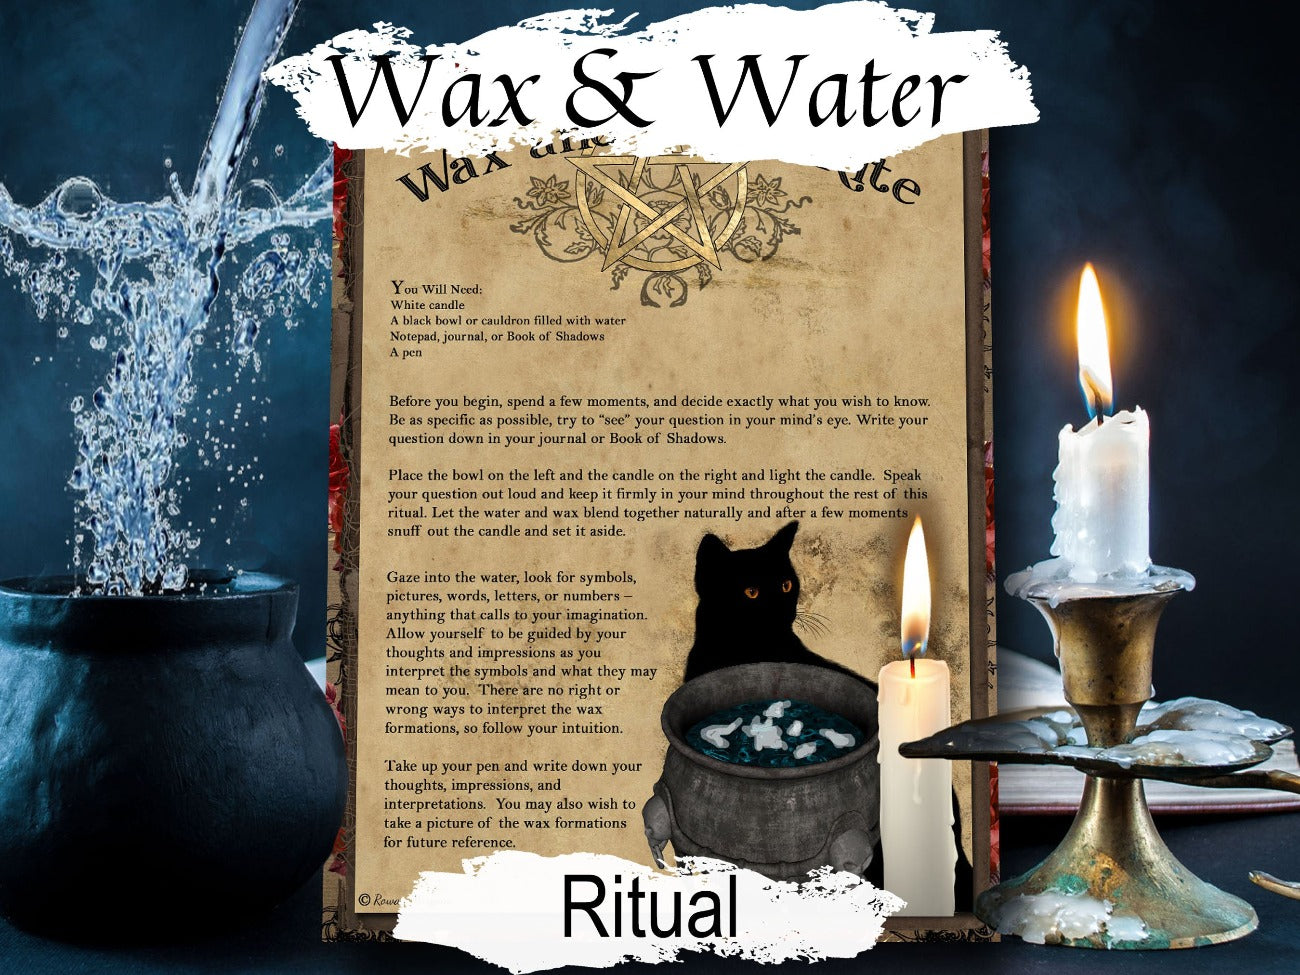 WAX DIVINATION RITUAL, Candle Wax and Water Spell Ritual, Fortune Telling using Melting Wax Predictions, Witchcraft Read Candle Wax Guide - Morgana Magick Spell